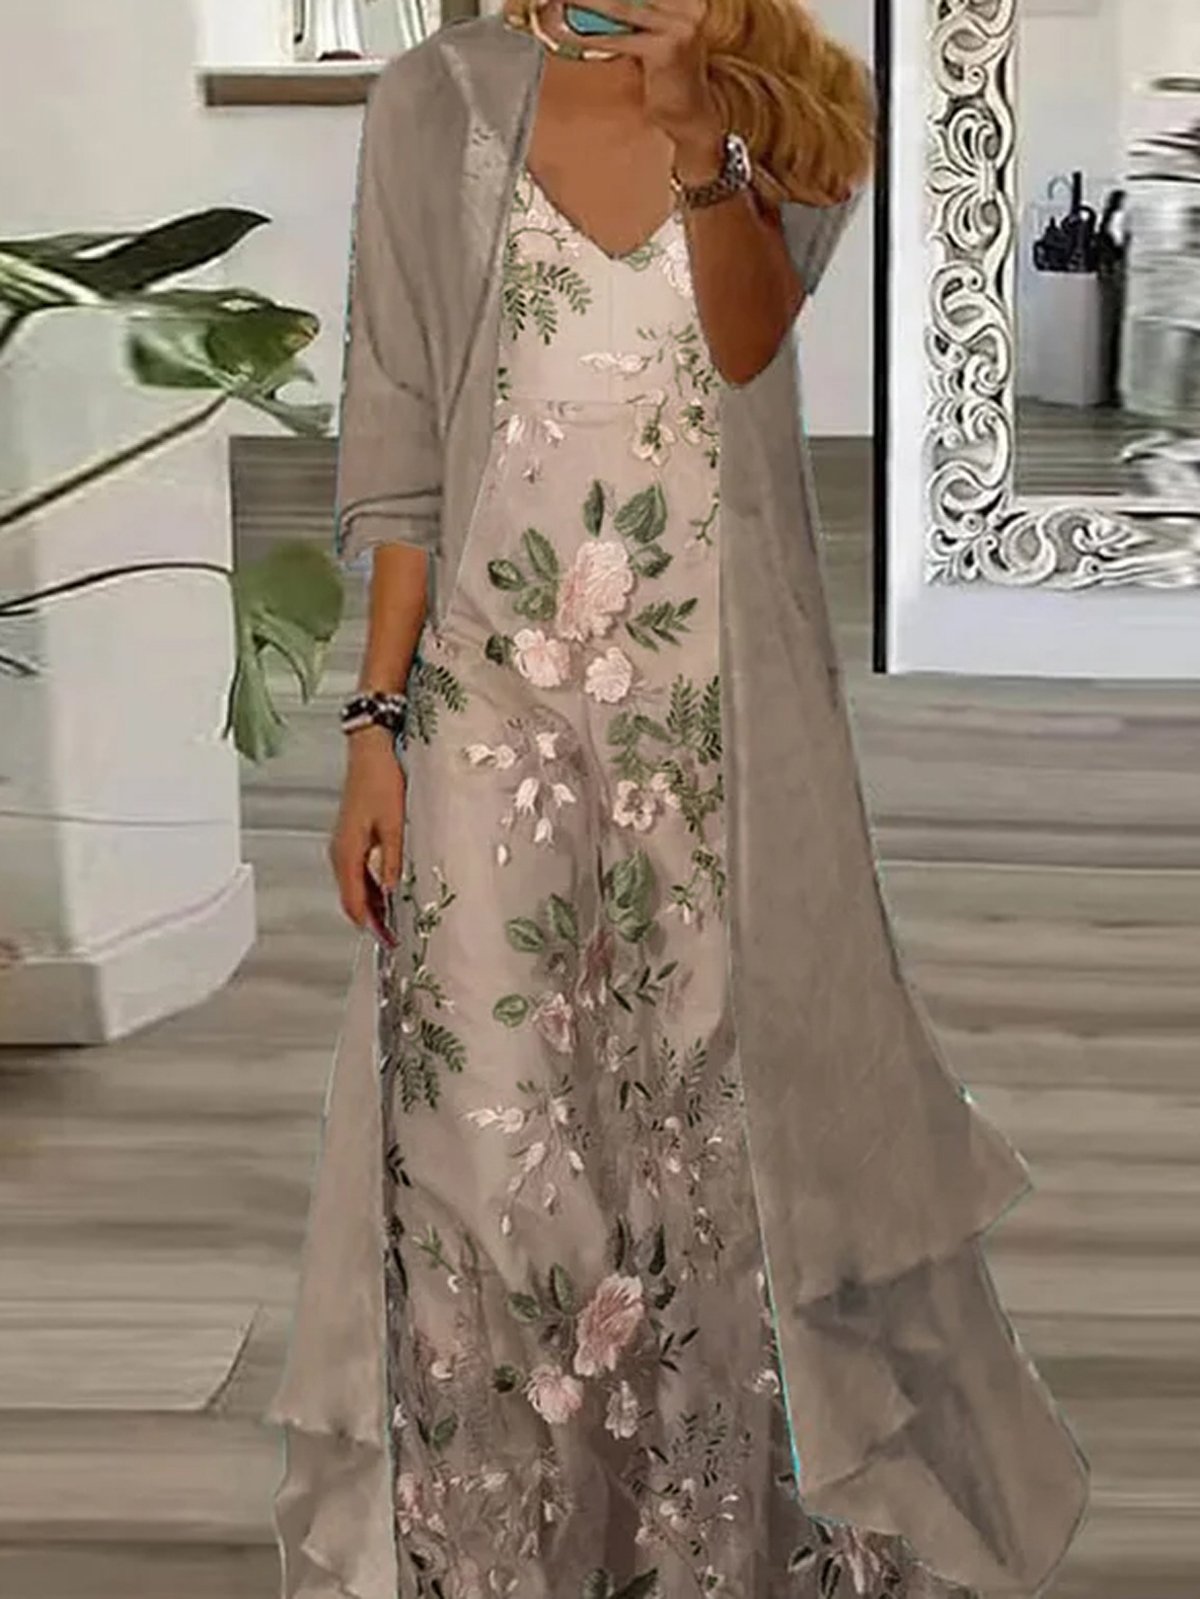 Women's Floral Daily Going Out Two Piece Set Three Quarter Sleeve Casual Spring/Fall Coat With Skirt Matching Set Khaki